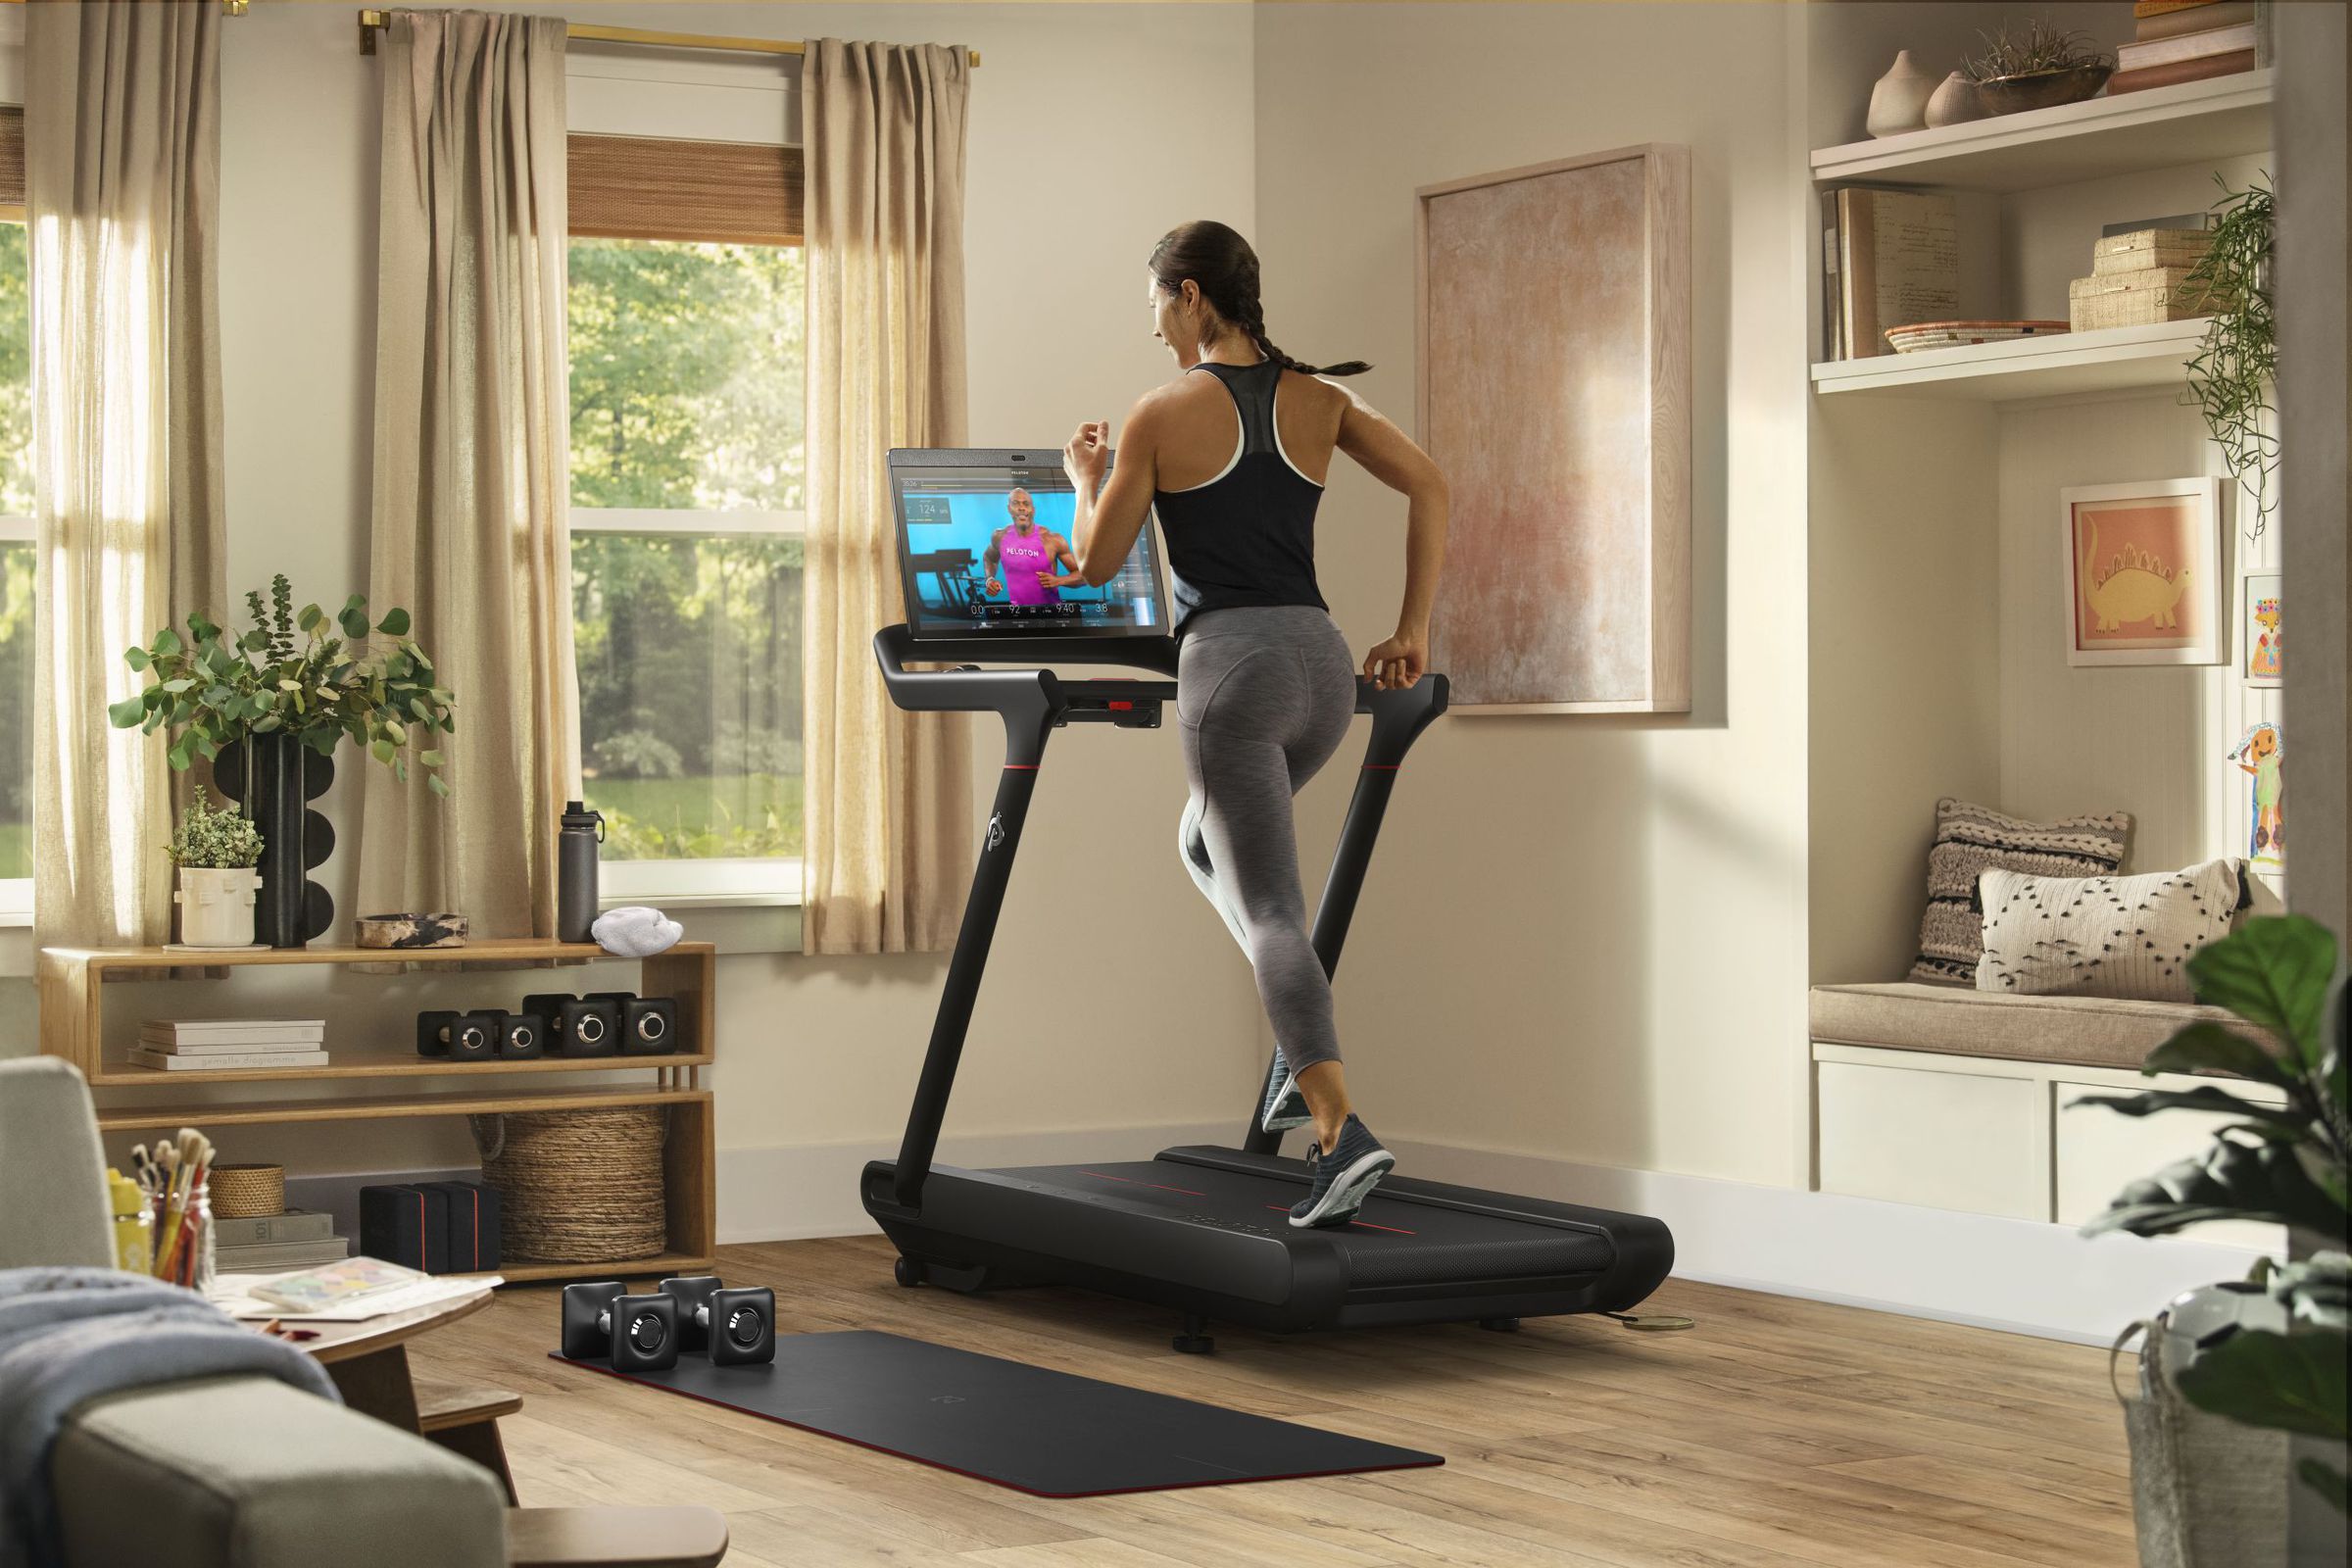 The new treadmill is smaller than the original and drops the latter’s slatted belt design. 